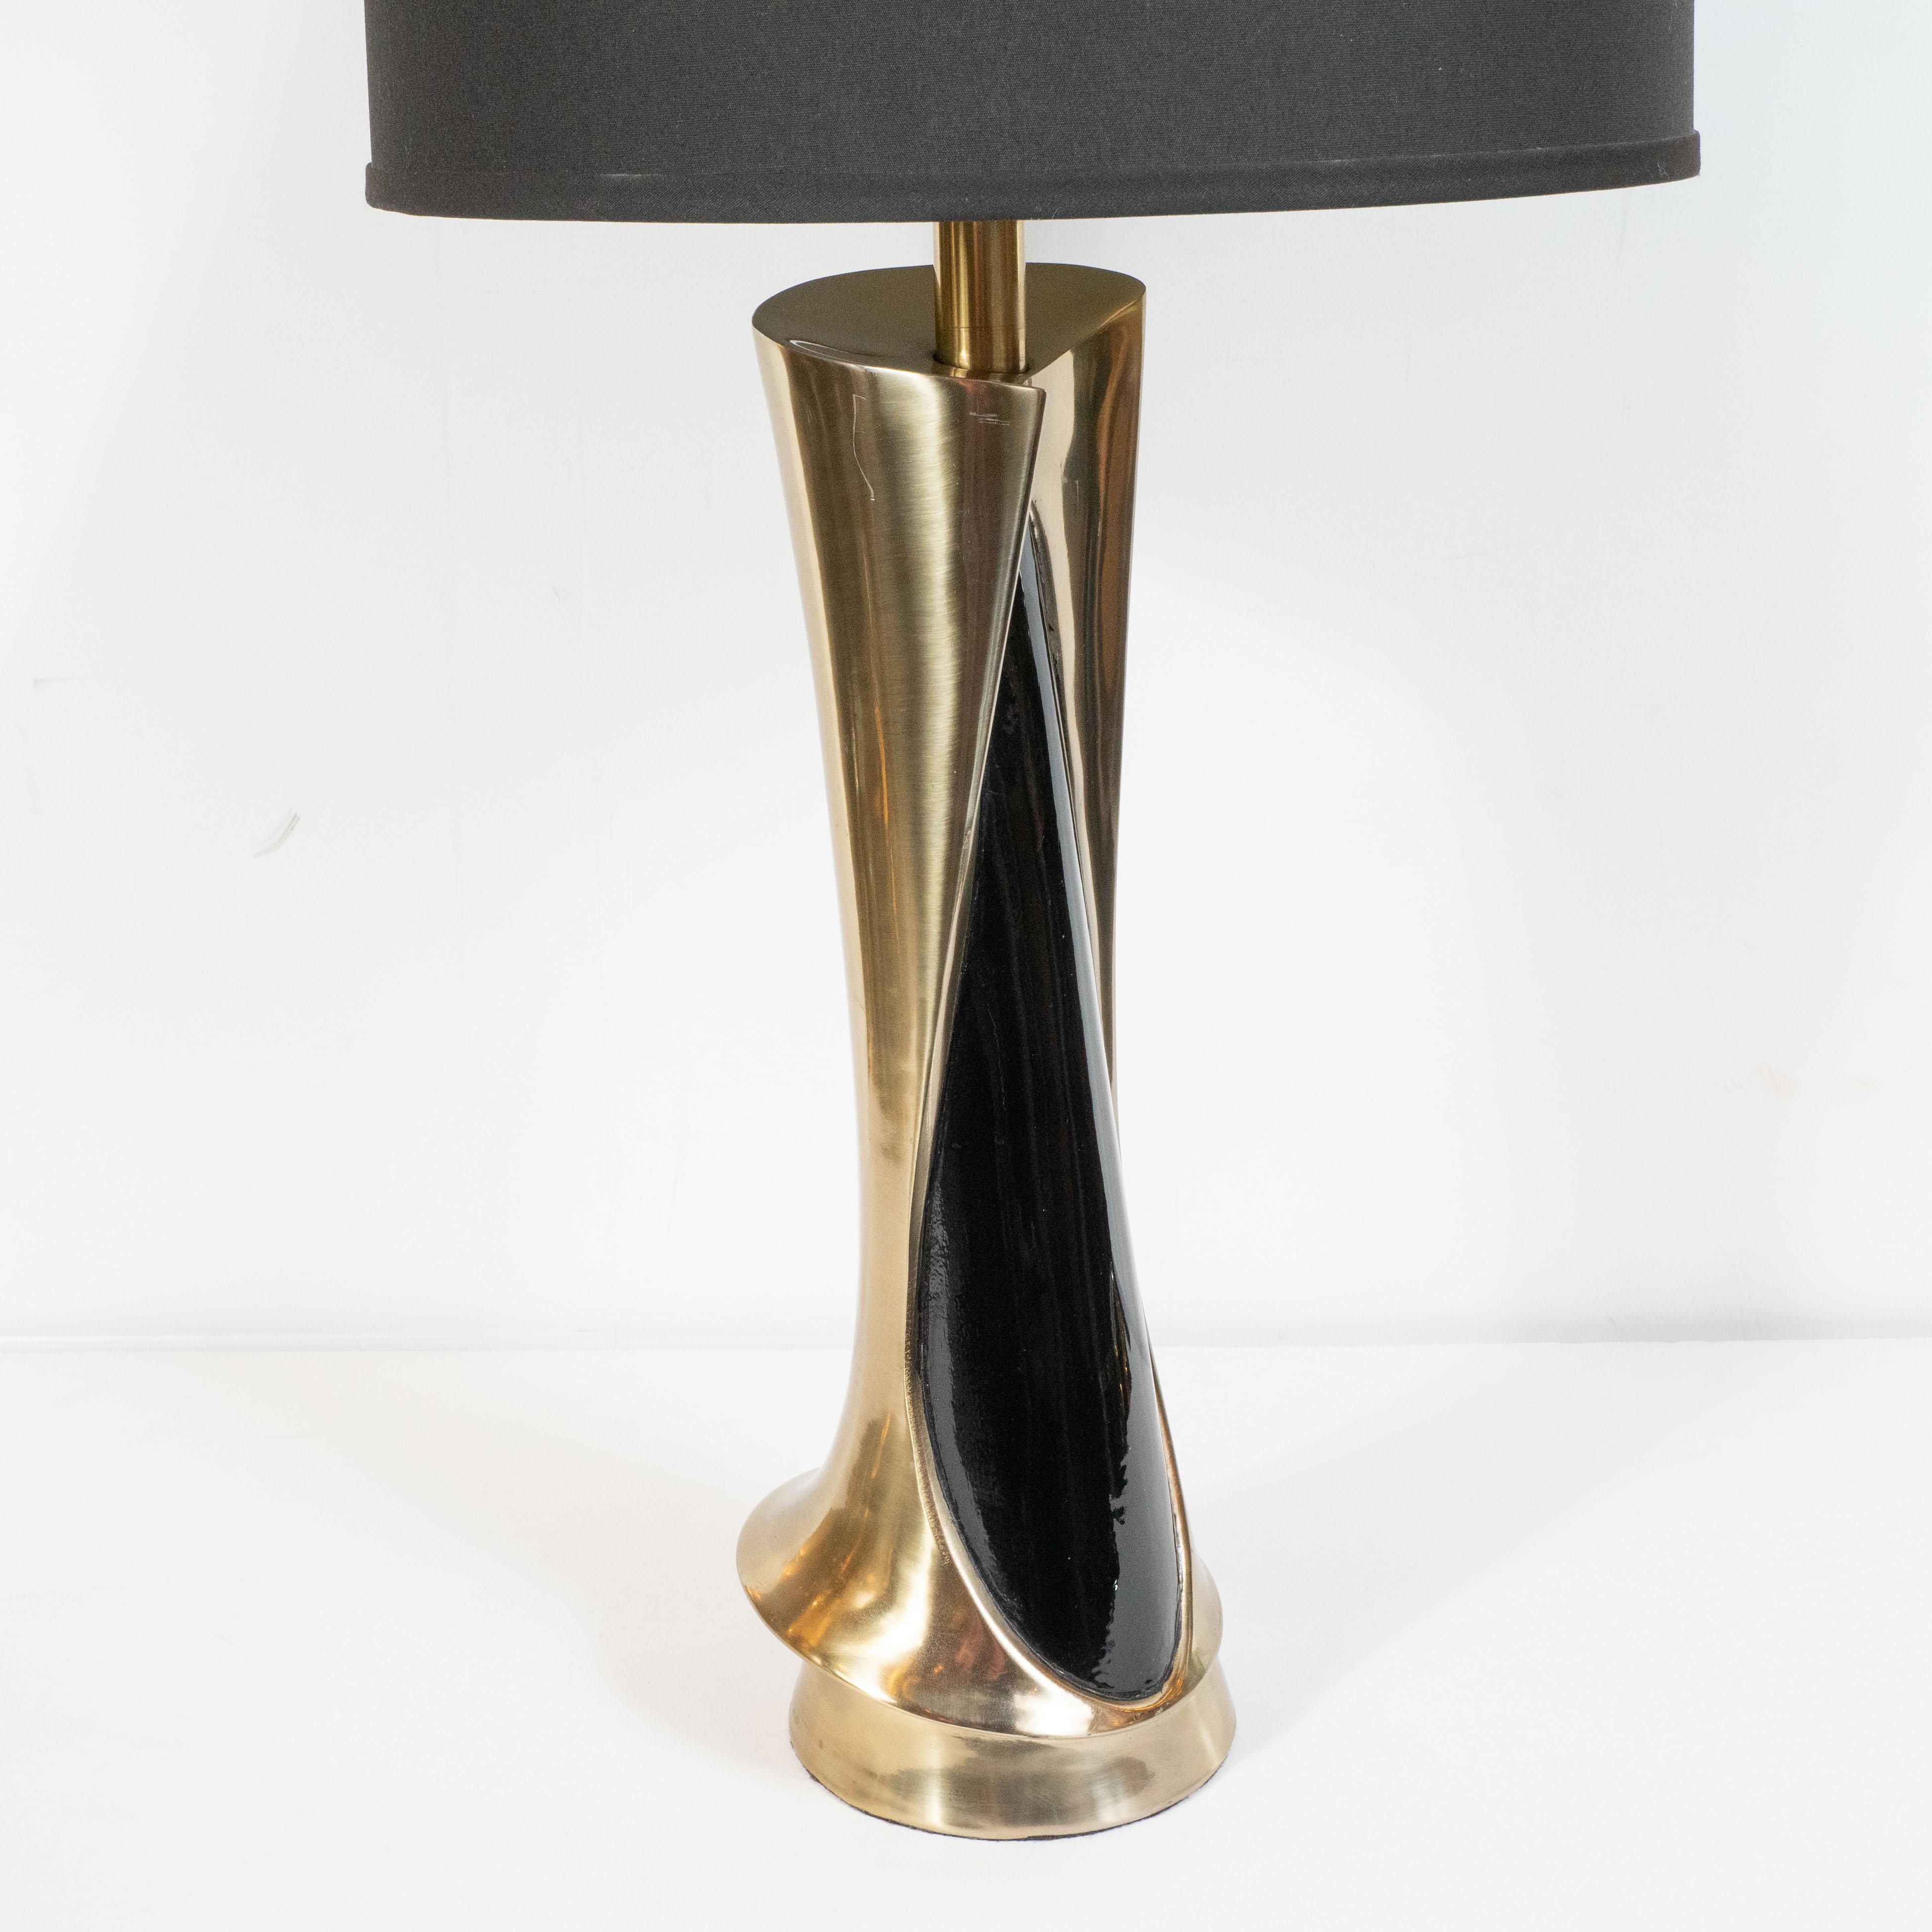 Pair of Midcentury Brass and Ebonized Walnut Table Lamps by Laurel & Co. 1